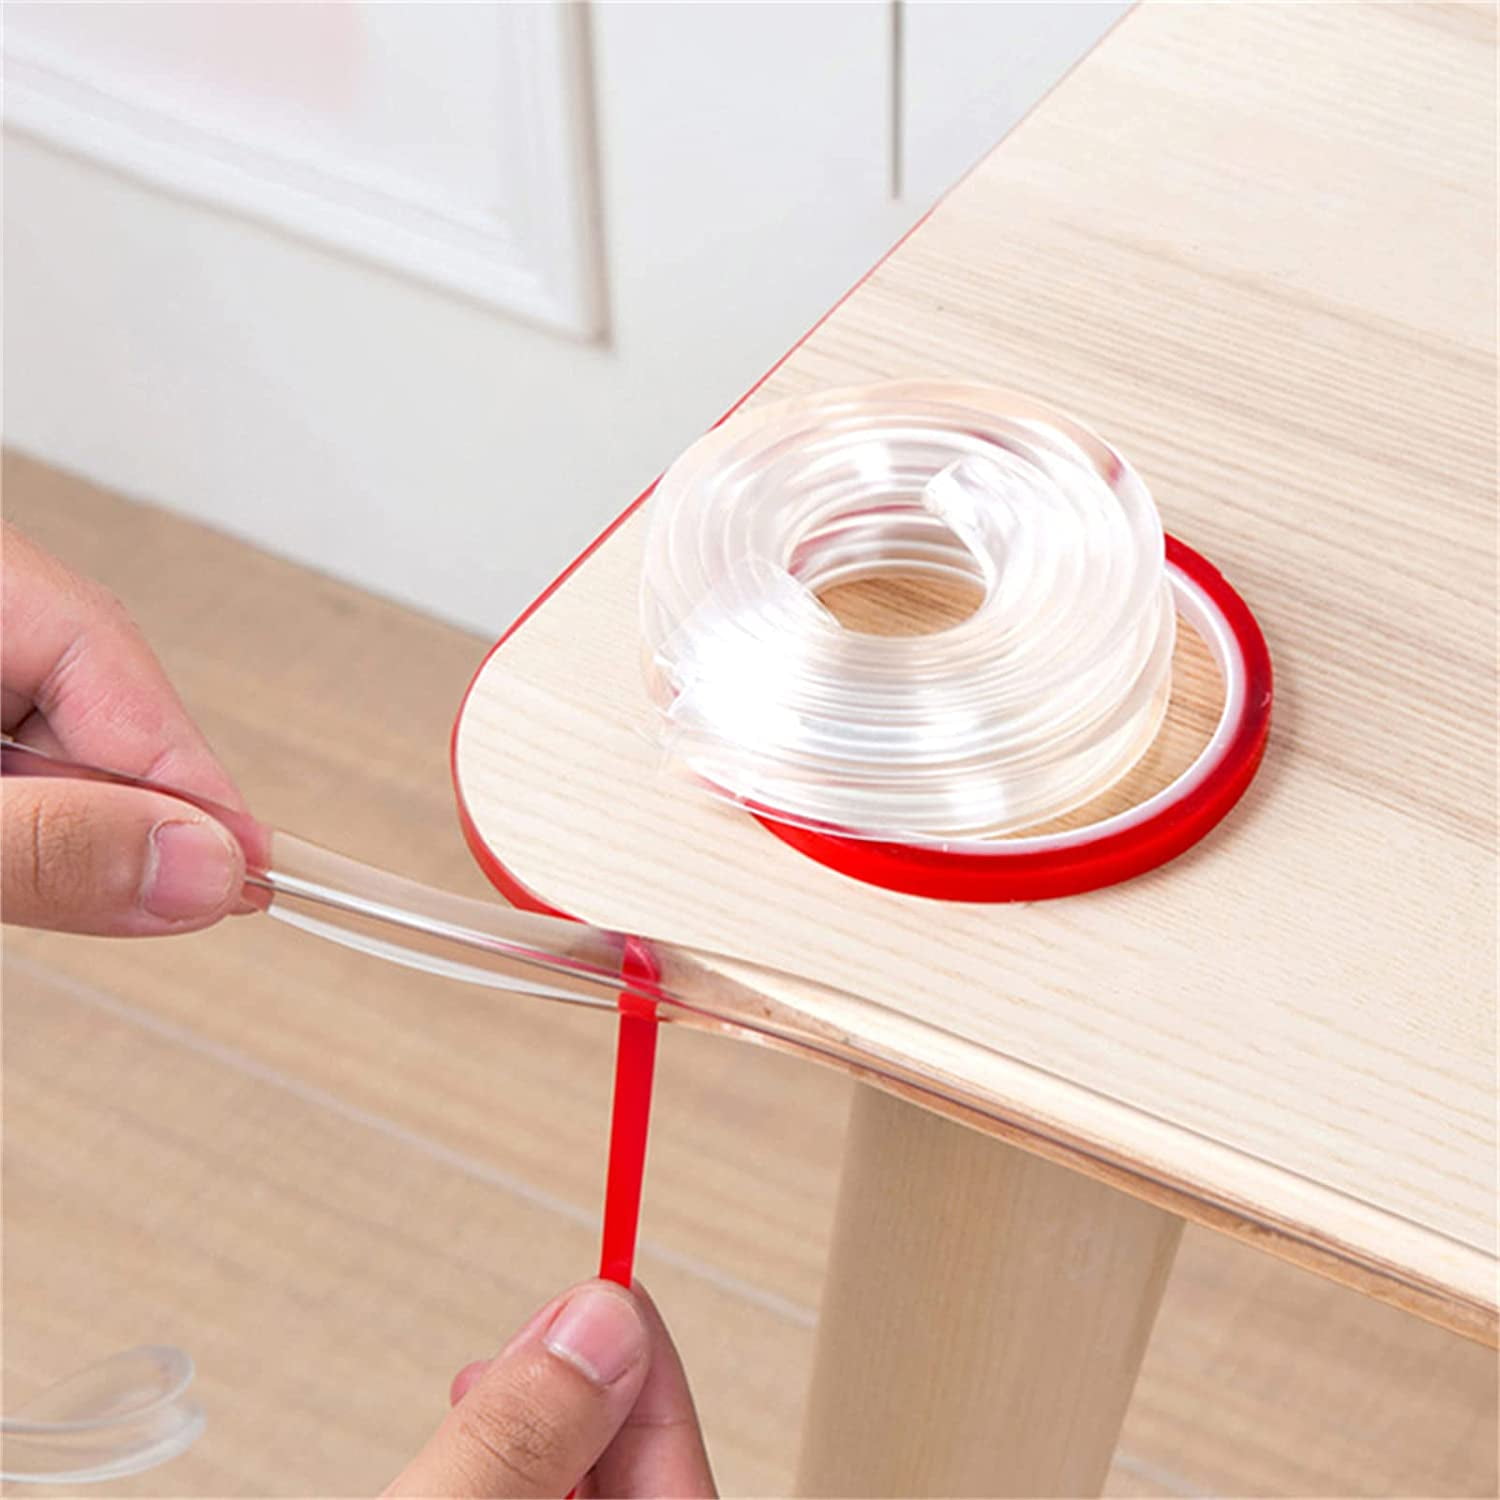 Table Edge Corner Protector Foam Bumper Cushion Strip With Double-sided Adhesive 